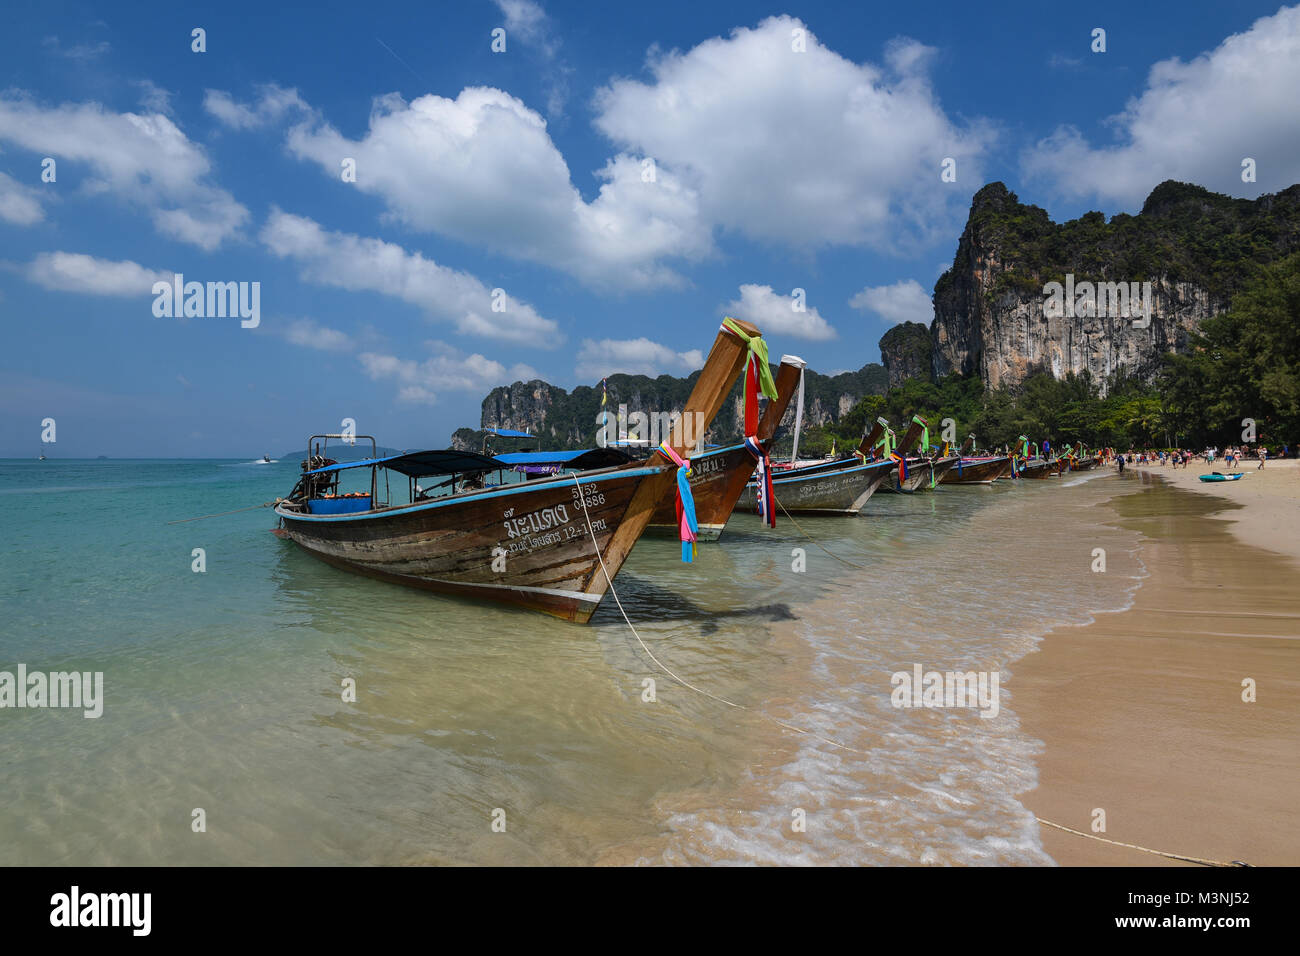 Stunning landscape view of a row of long-tail boats anchored on a beautiful golden sandy beach in Thailand with blue sky and towering cliffs Stock Photo